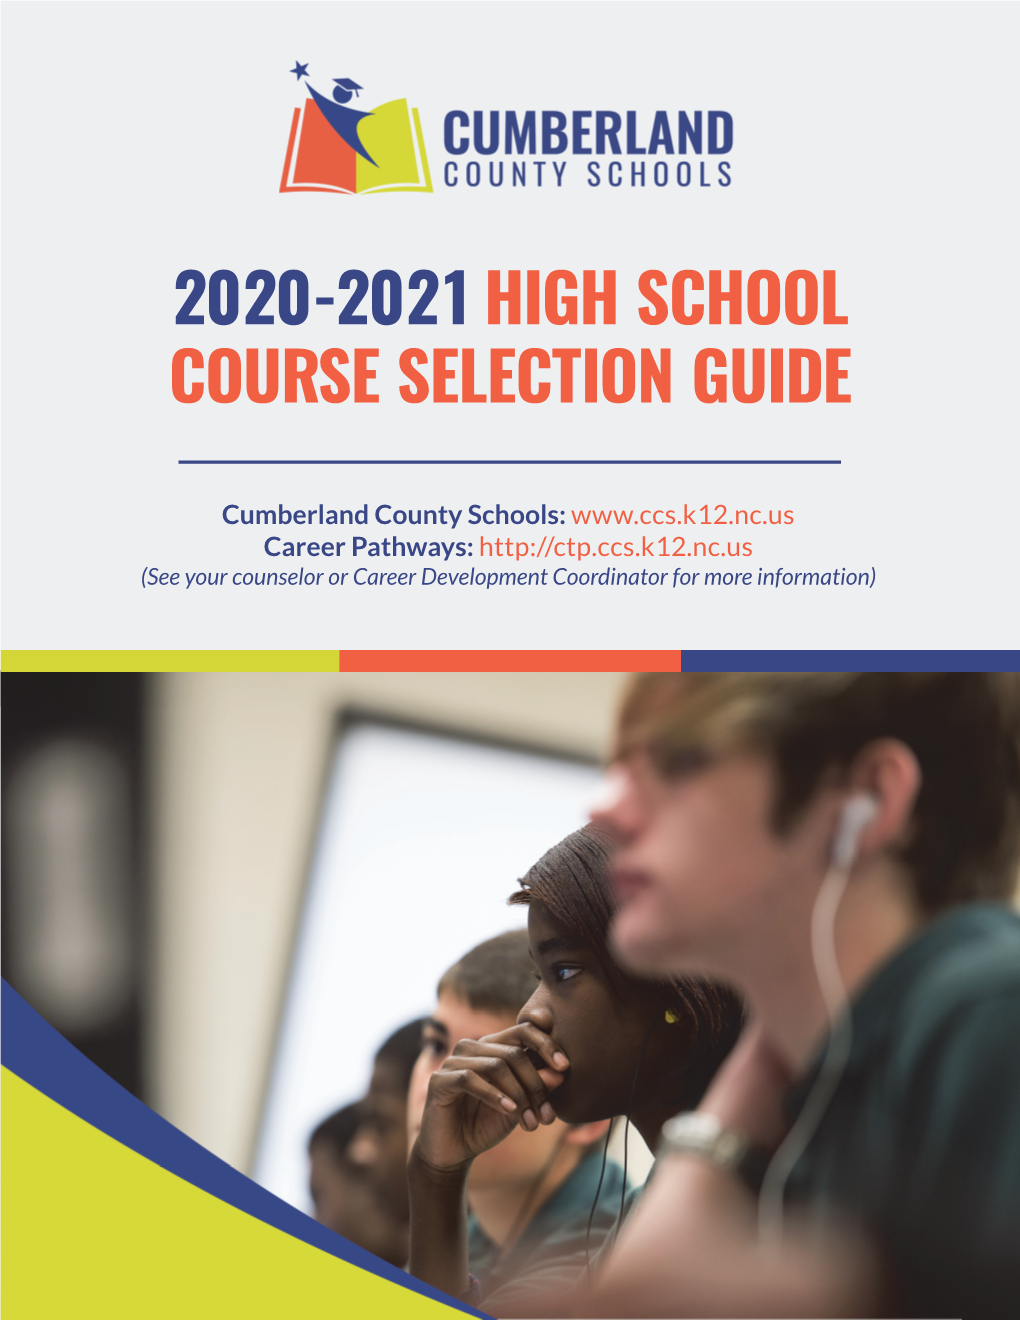 2020-2021 High School Course Selection Guide